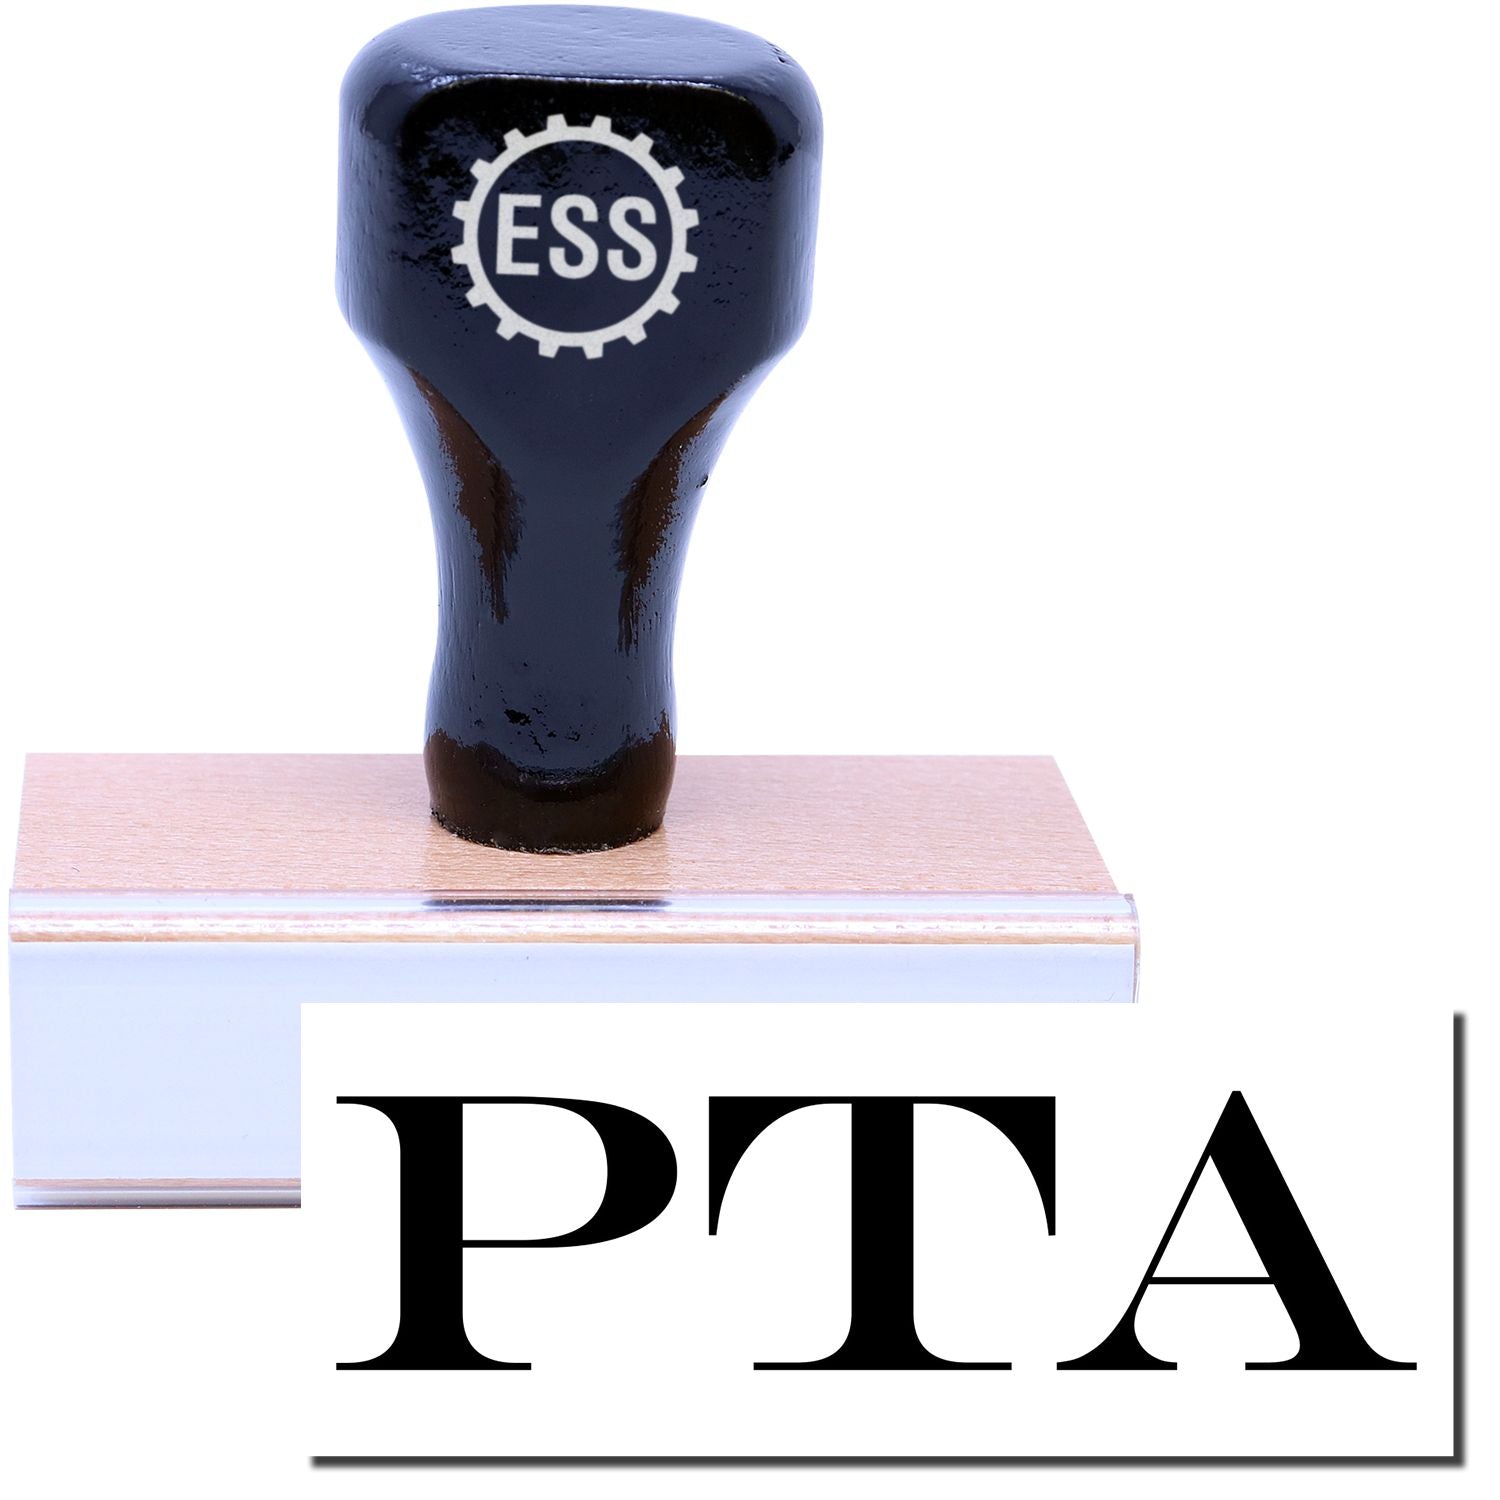 A stock office rubber stamp with a stamped image showing how the text "PTA" in a large font is displayed after stamping.